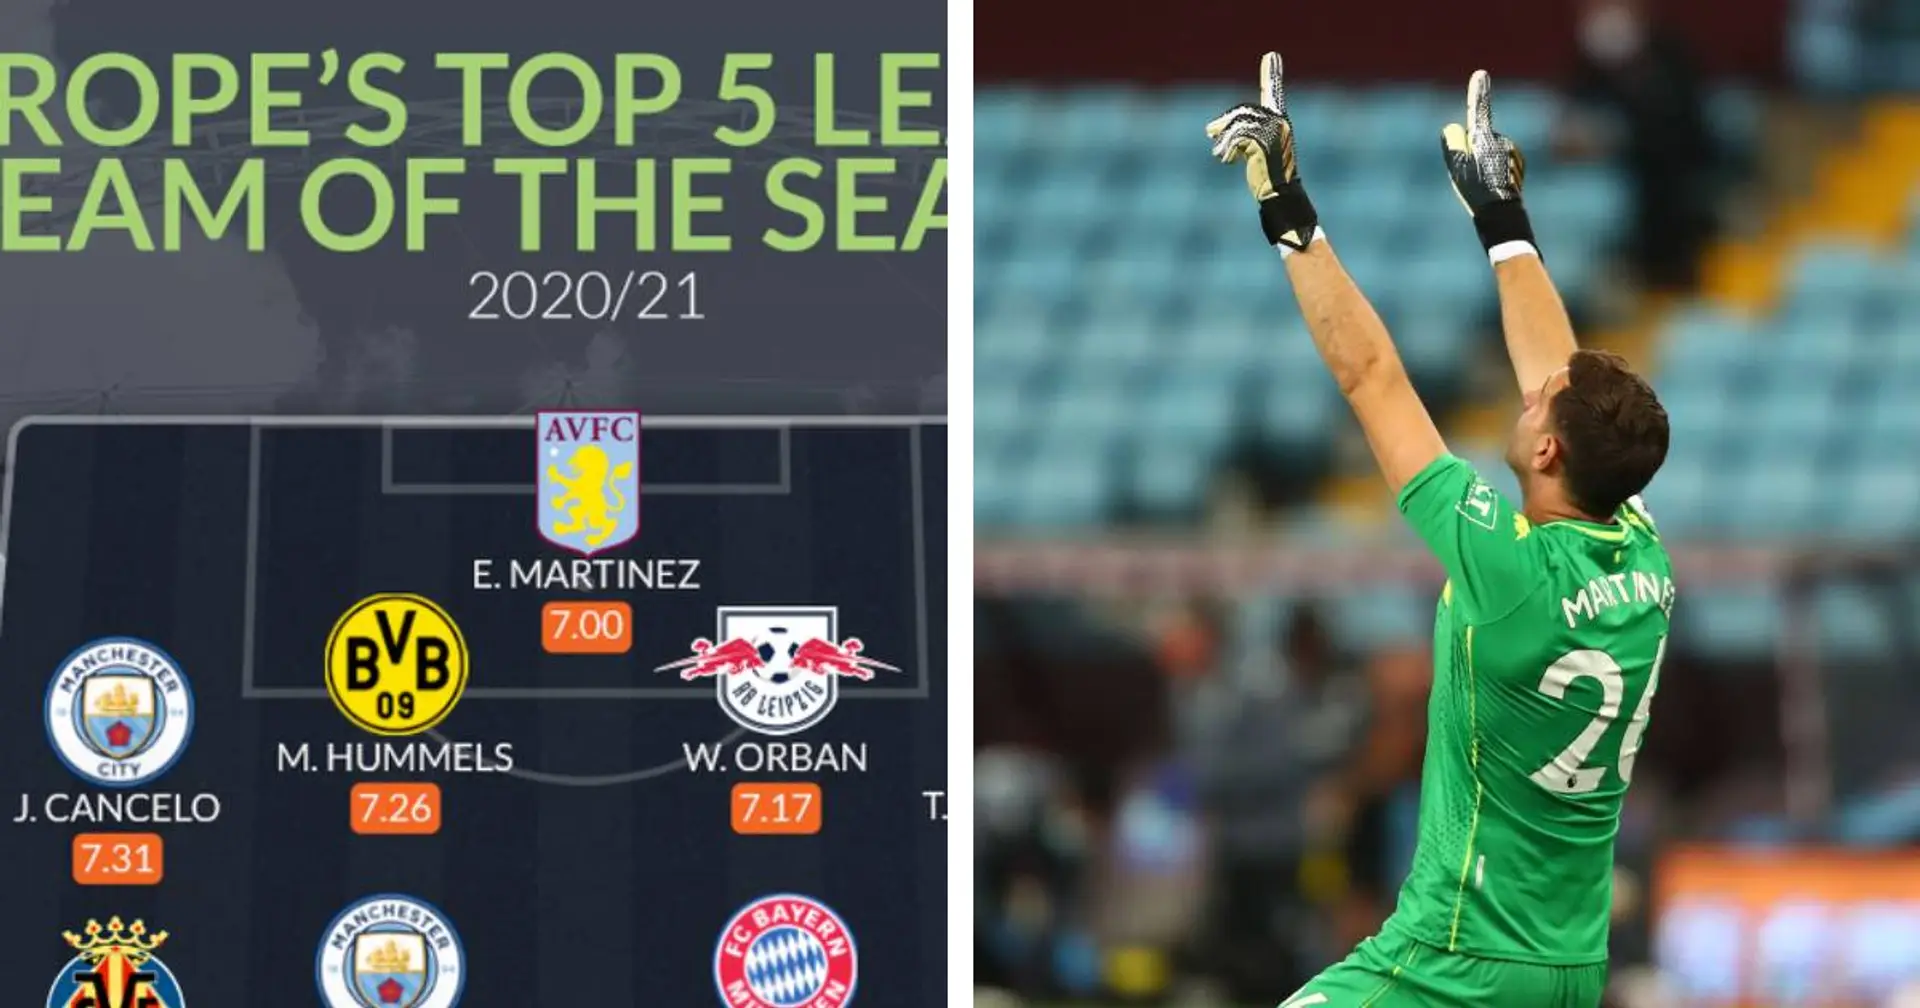 'Best shot-stopper in Europe', 'Should start at Copa America': fans discuss Martinez's campaign after Emi makes Team of the Season